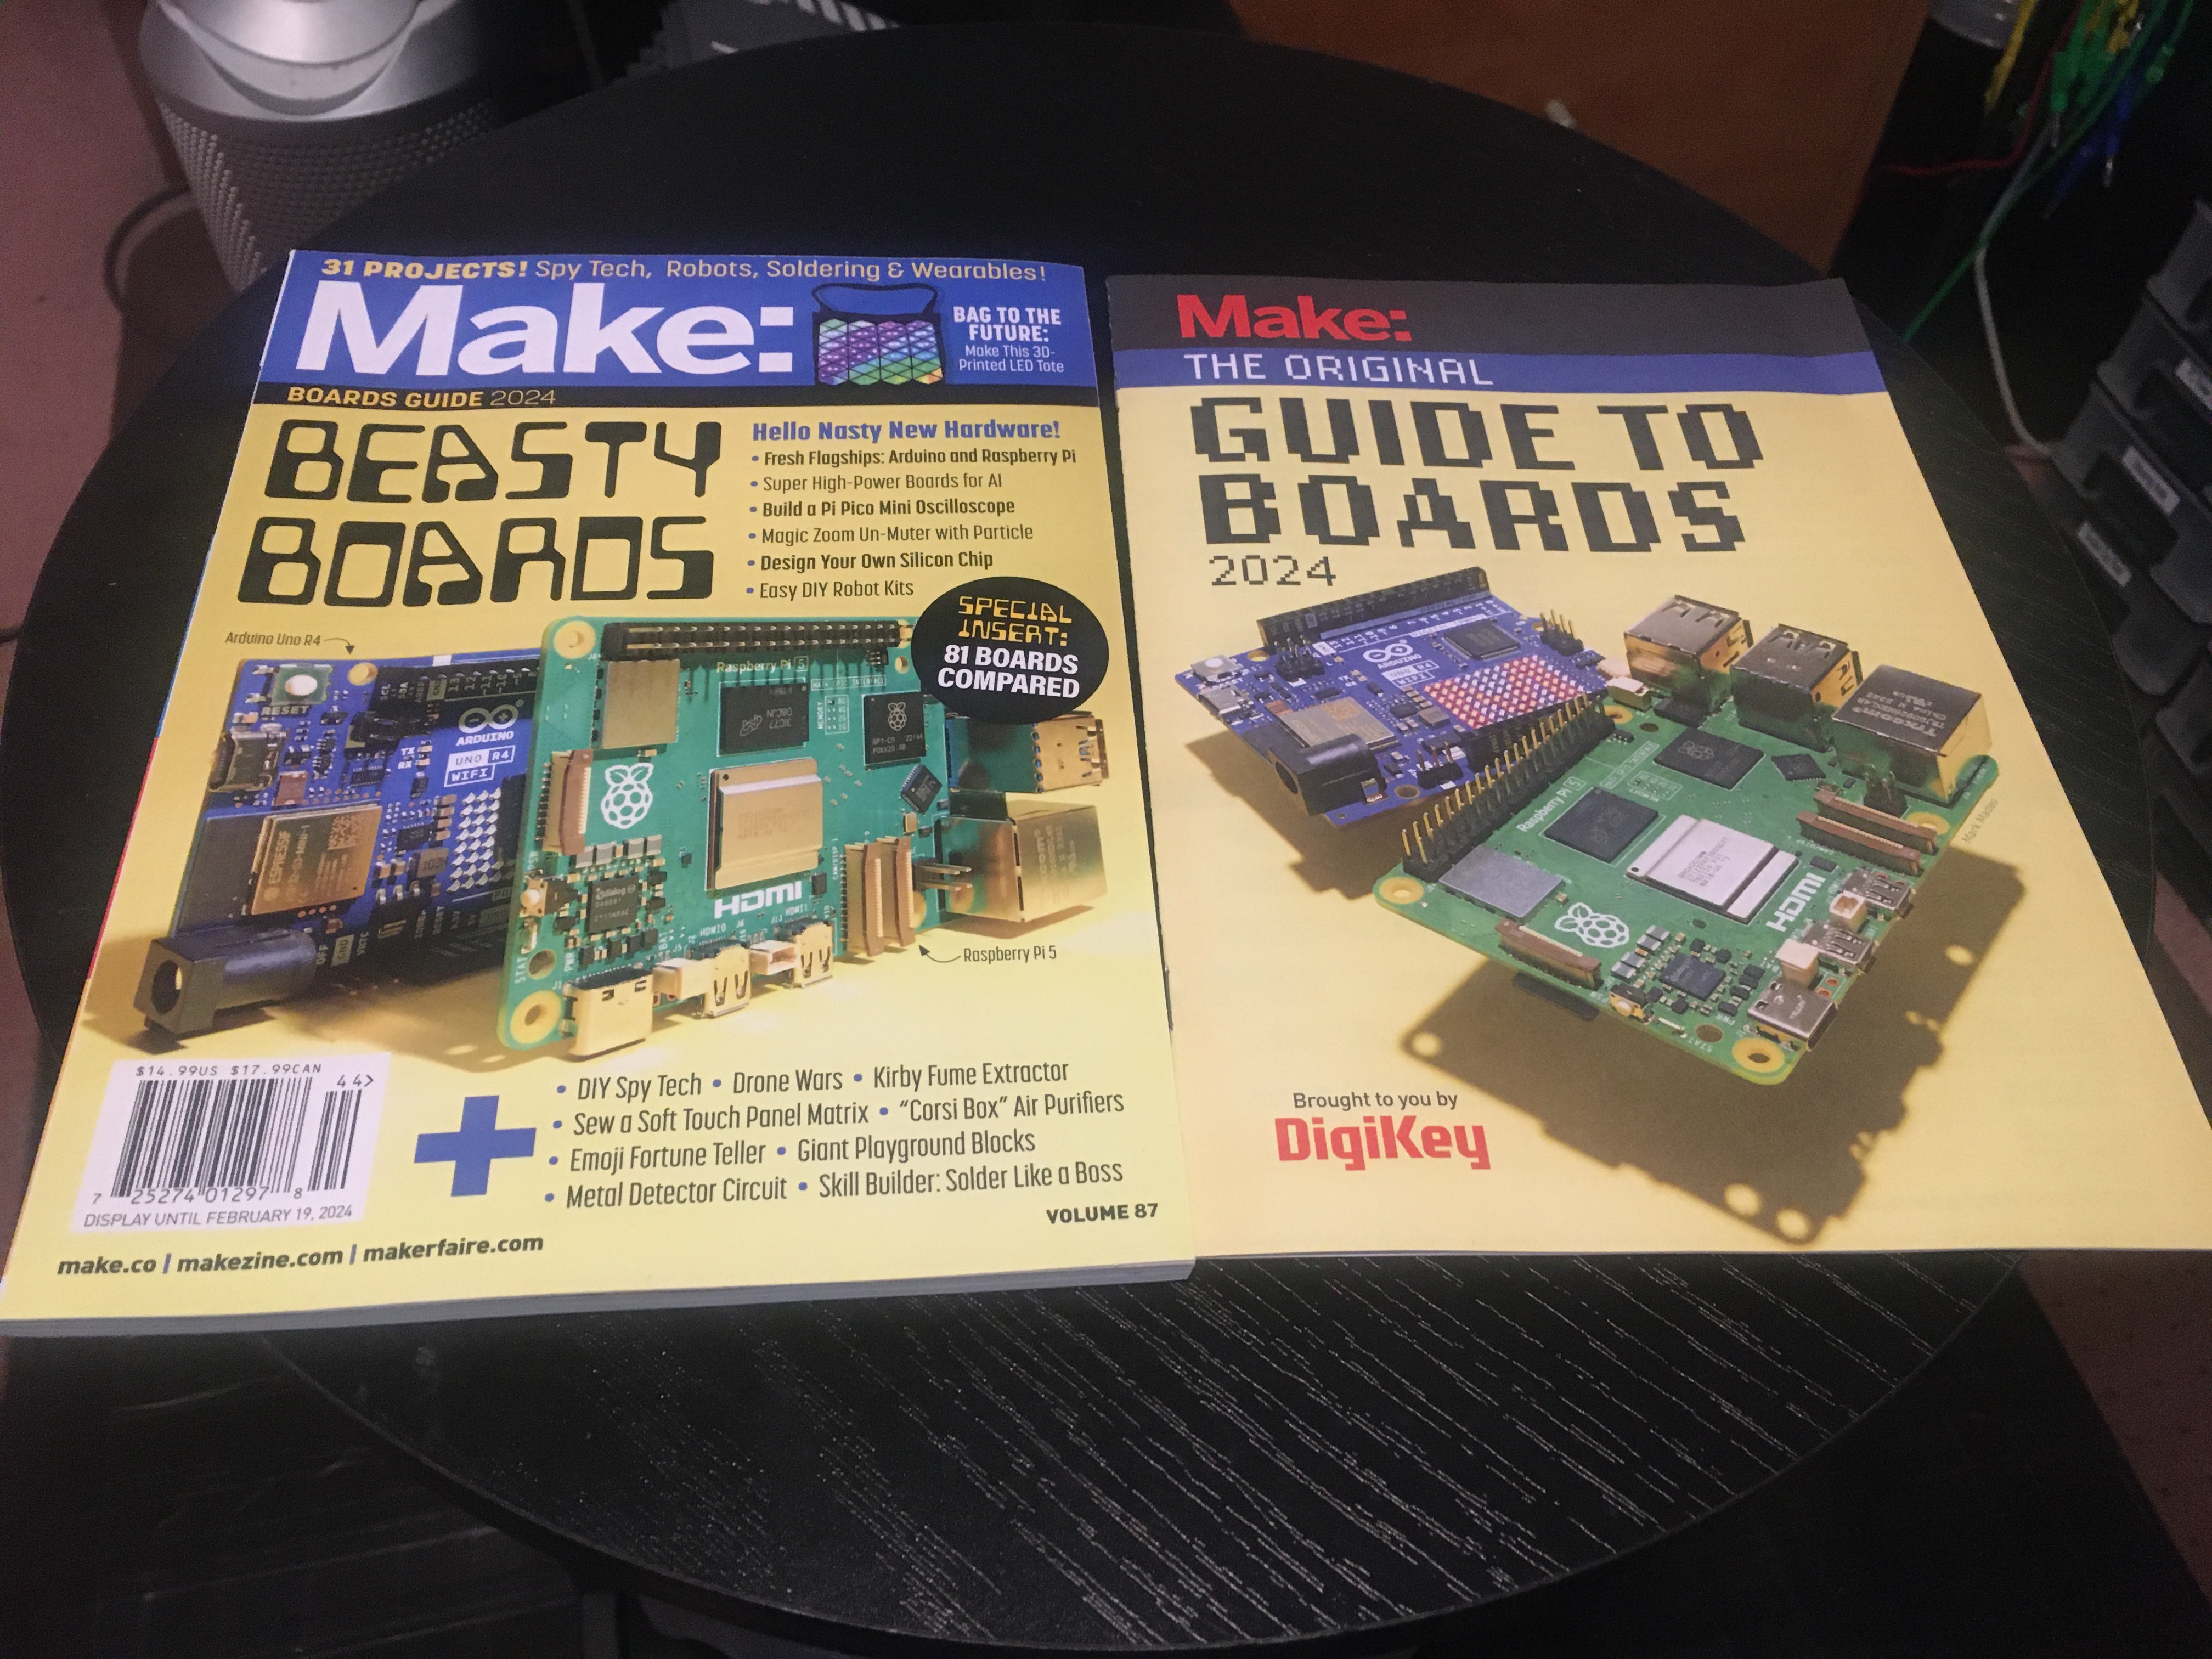 Make: magazine Volume 87 and Guide to Boards 2024